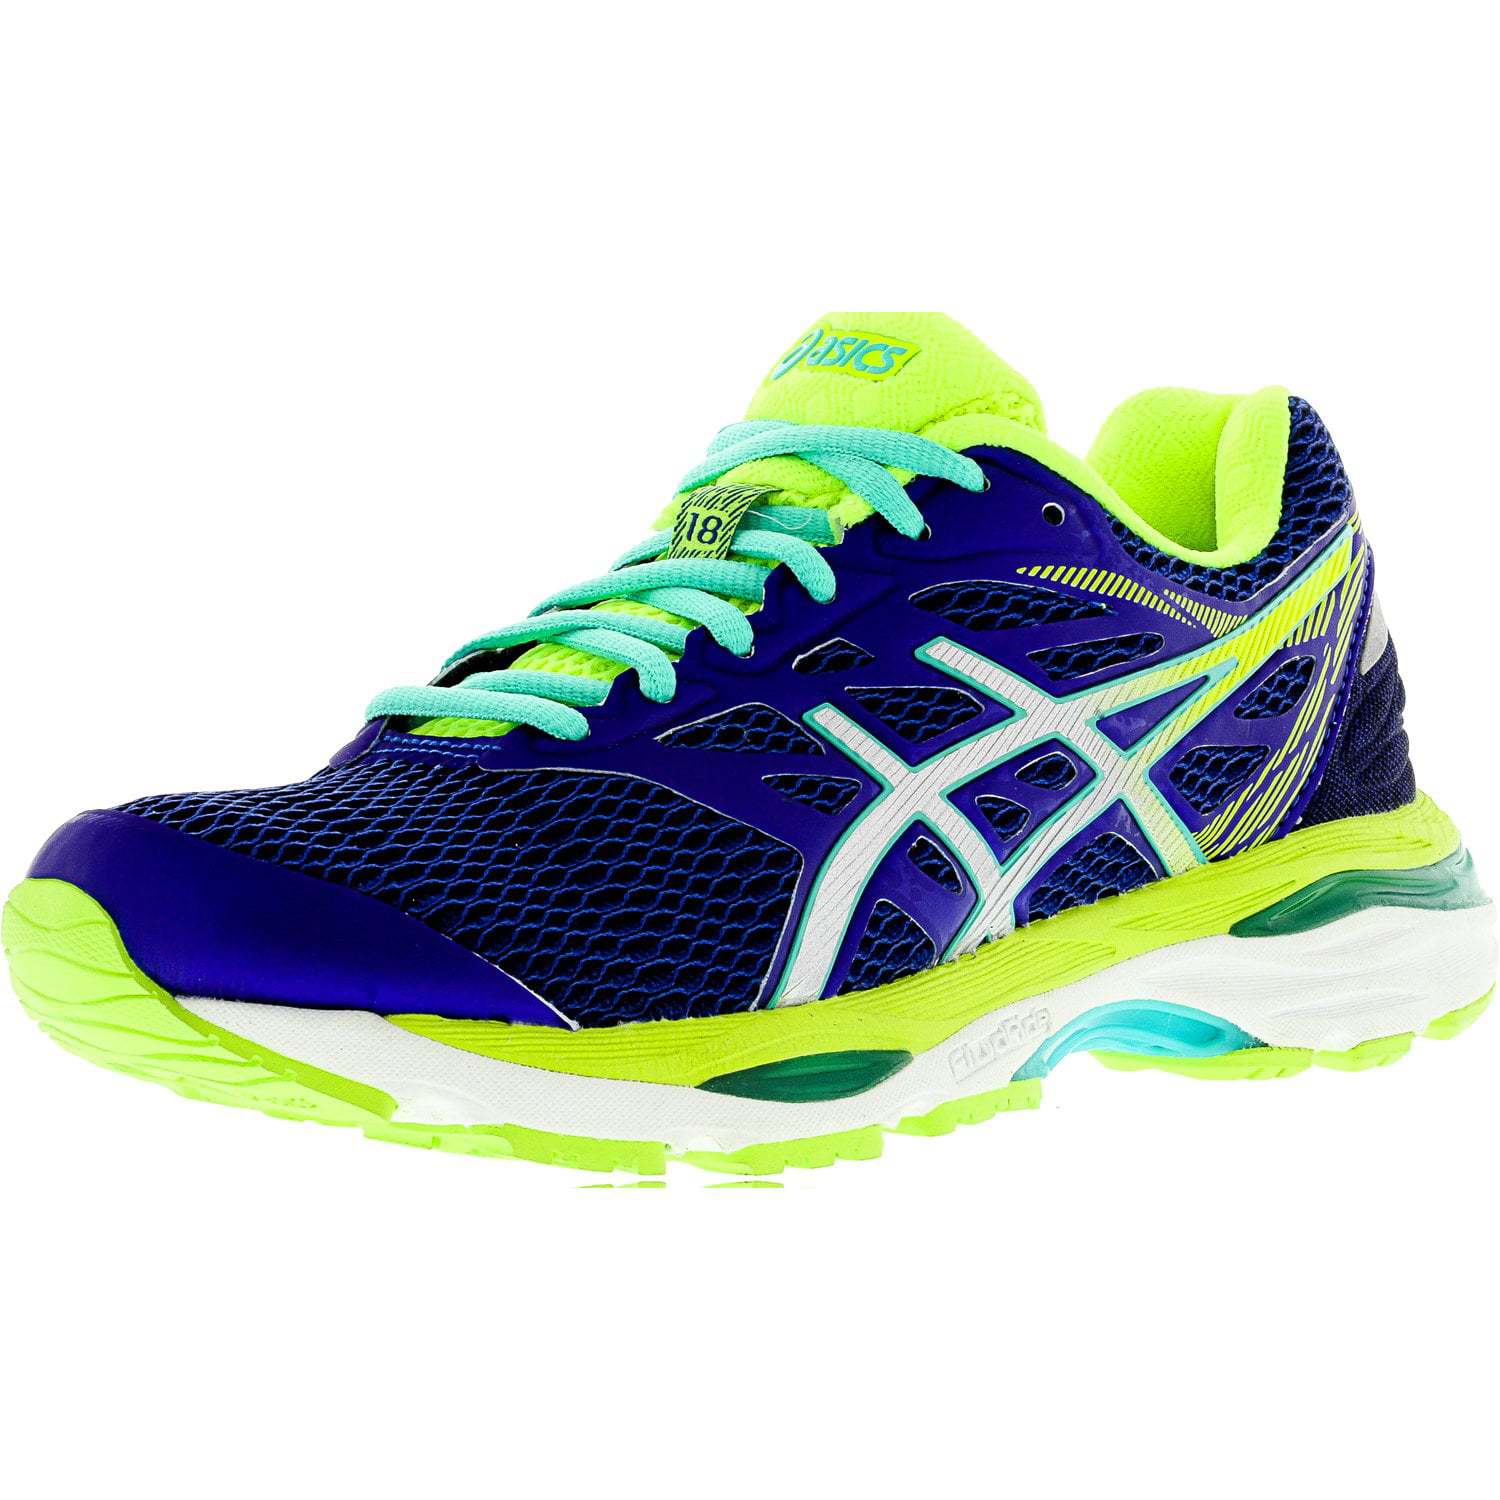 Asics Women's Gel-Cumulus 18 Blue / Silver Safety Yellow Ankle-High ...